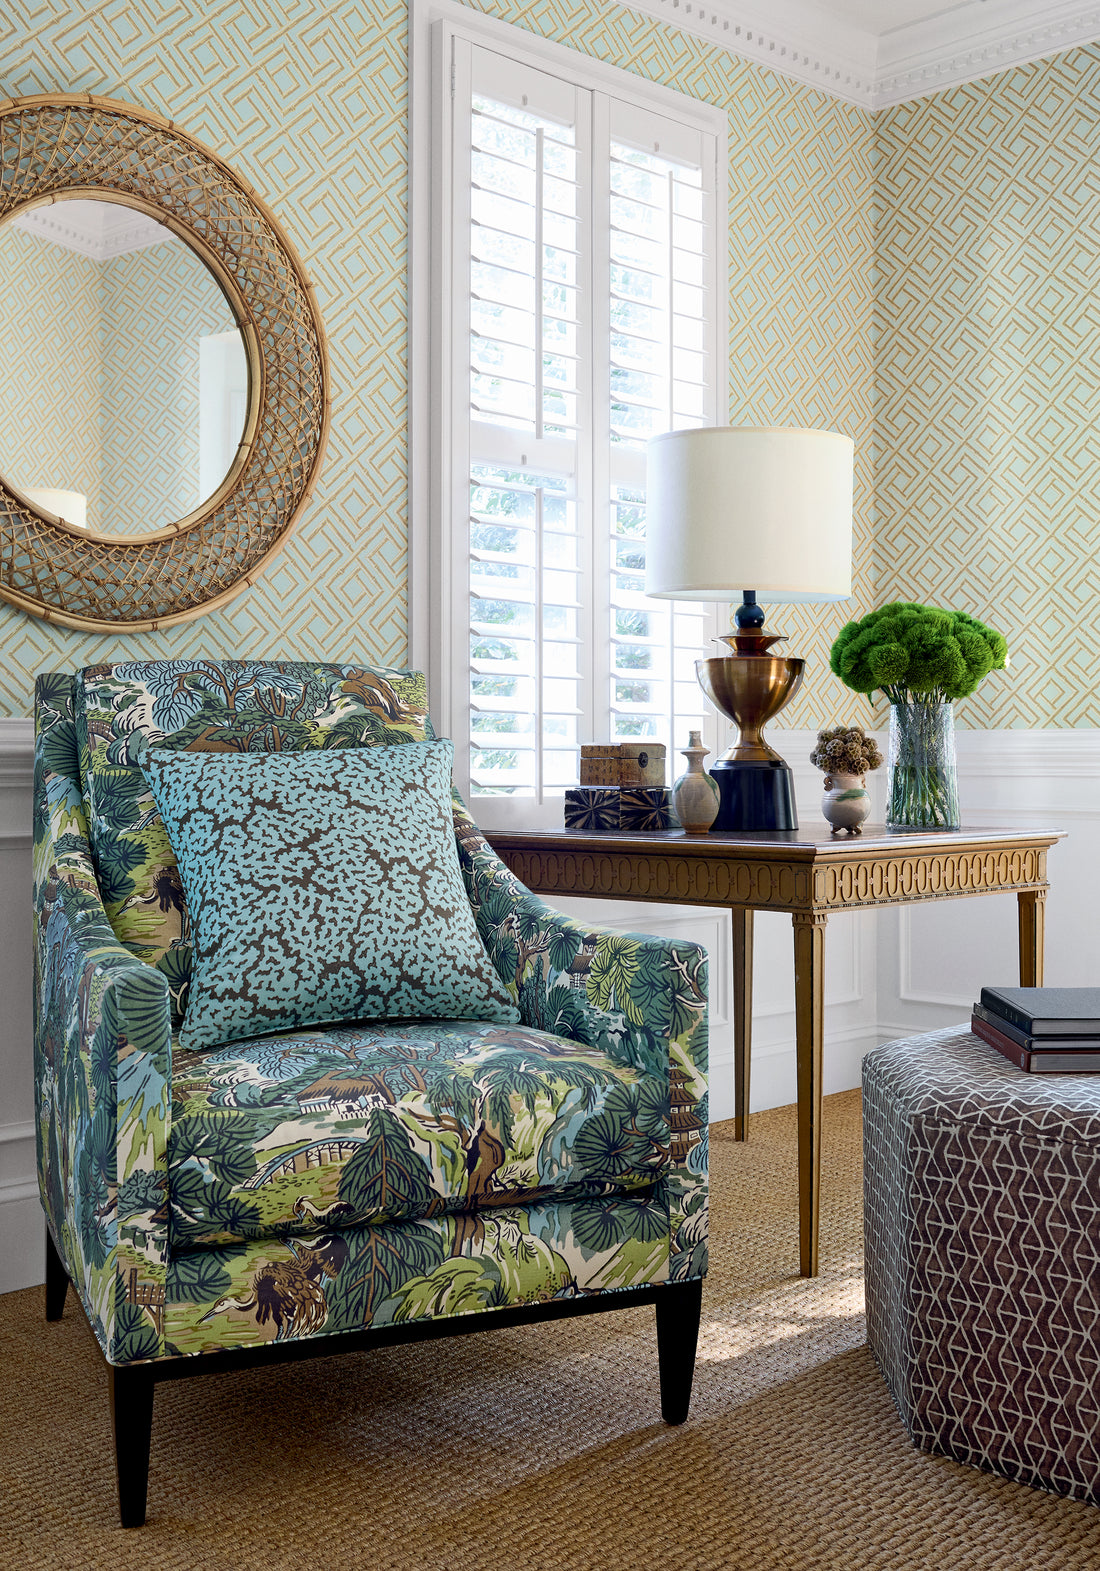 Carson Chair in Pagoda Trees printed fabric in Brown and Green color - pattern number F942025 - by Thibaut in the Sojourn collection